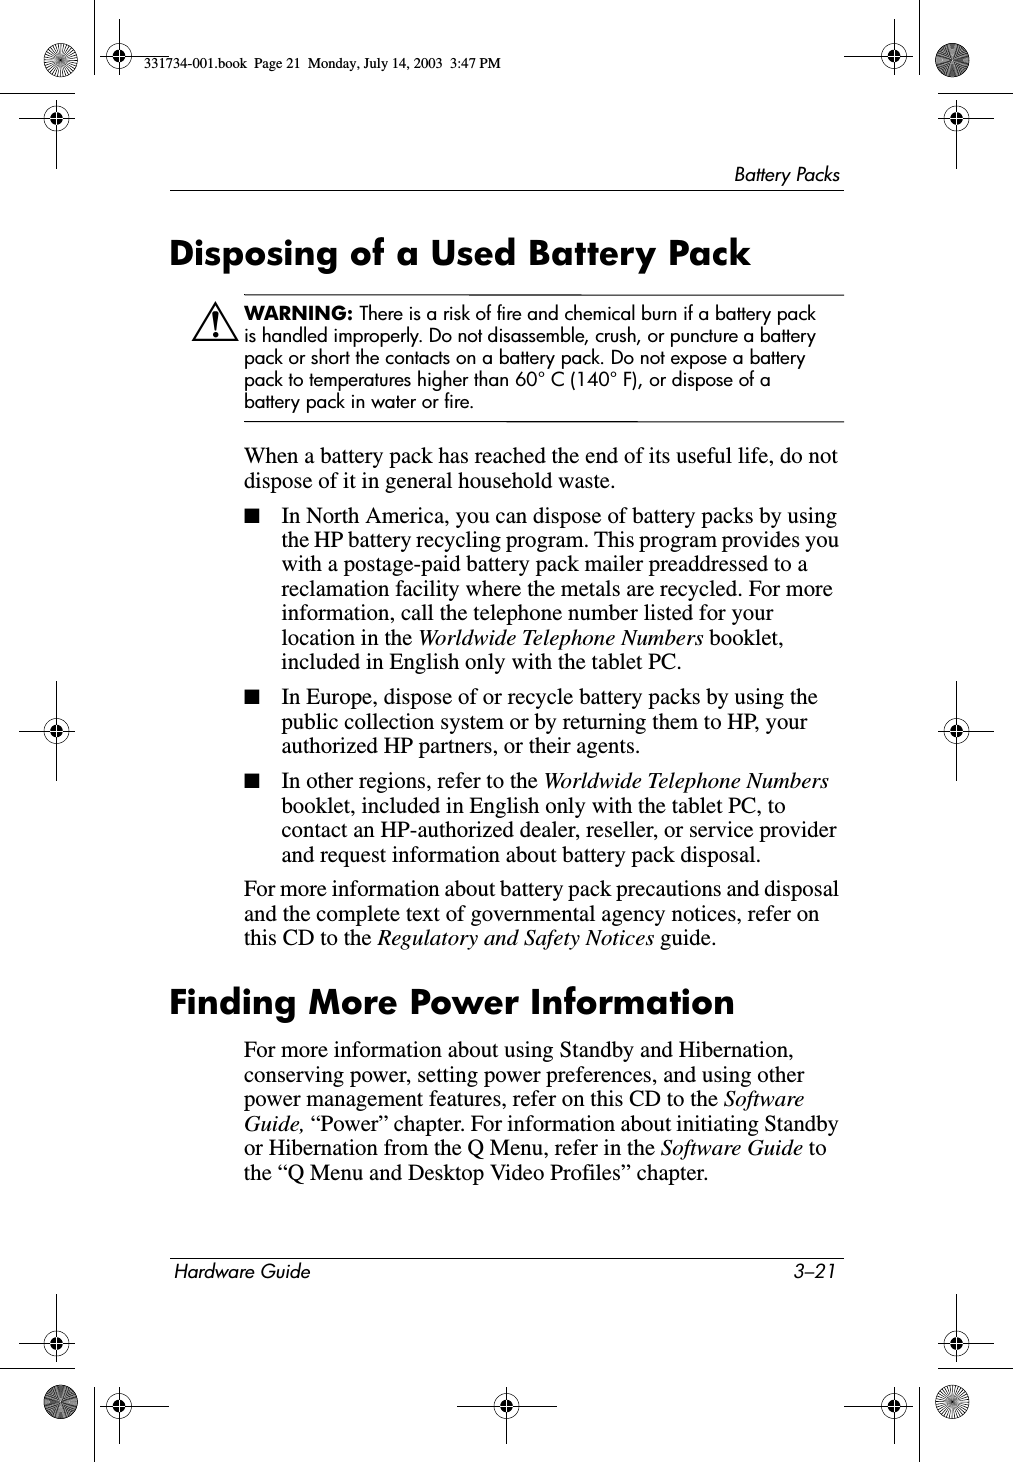 Battery PacksHardware Guide 3–21Disposing of a Used Battery PackÅWARNING: There is a risk of fire and chemical burn if a battery pack is handled improperly. Do not disassemble, crush, or puncture a battery pack or short the contacts on a battery pack. Do not expose a battery pack to temperatures higher than 60° C (140° F), or dispose of a battery pack in water or fire.When a battery pack has reached the end of its useful life, do not dispose of it in general household waste.■In North America, you can dispose of battery packs by using the HP battery recycling program. This program provides you with a postage-paid battery pack mailer preaddressed to a reclamation facility where the metals are recycled. For more information, call the telephone number listed for your location in the Worldwide Telephone Numbers booklet, included in English only with the tablet PC.■In Europe, dispose of or recycle battery packs by using the public collection system or by returning them to HP, your authorized HP partners, or their agents.■In other regions, refer to the Worldwide Telephone Numbers booklet, included in English only with the tablet PC, to contact an HP-authorized dealer, reseller, or service provider and request information about battery pack disposal.For more information about battery pack precautions and disposal and the complete text of governmental agency notices, refer on this CD to the Regulatory and Safety Notices guide.Finding More Power InformationFor more information about using Standby and Hibernation, conserving power, setting power preferences, and using other power management features, refer on this CD to the Software Guide, “Power” chapter. For information about initiating Standby or Hibernation from the Q Menu, refer in the Software Guide to the “Q Menu and Desktop Video Profiles” chapter.331734-001.book  Page 21  Monday, July 14, 2003  3:47 PM